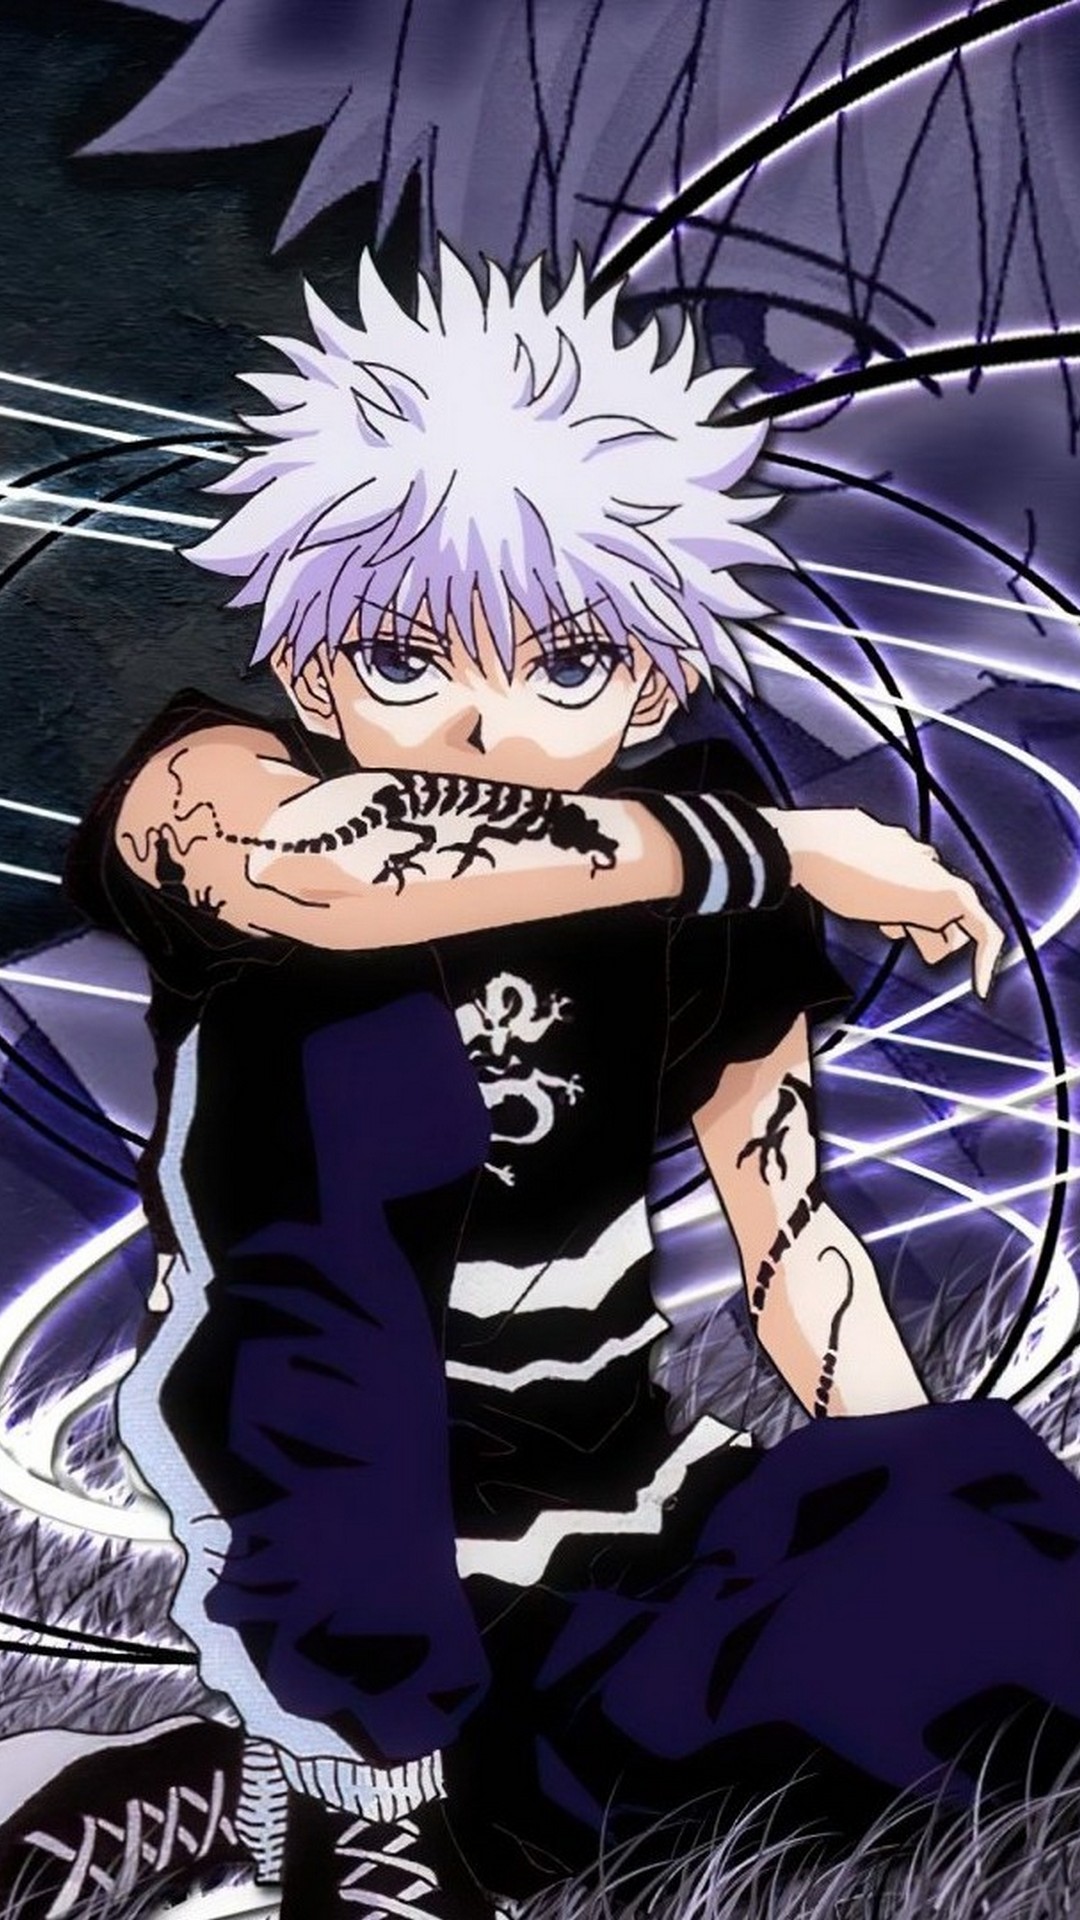 Killua iPhone 7 Wallpaper HD with high-resolution 1080x1920 pixel. Download all Mobile Wallpapers and Use them as wallpapers for your iPhone, Tablet, iPad, Android and other mobile devices